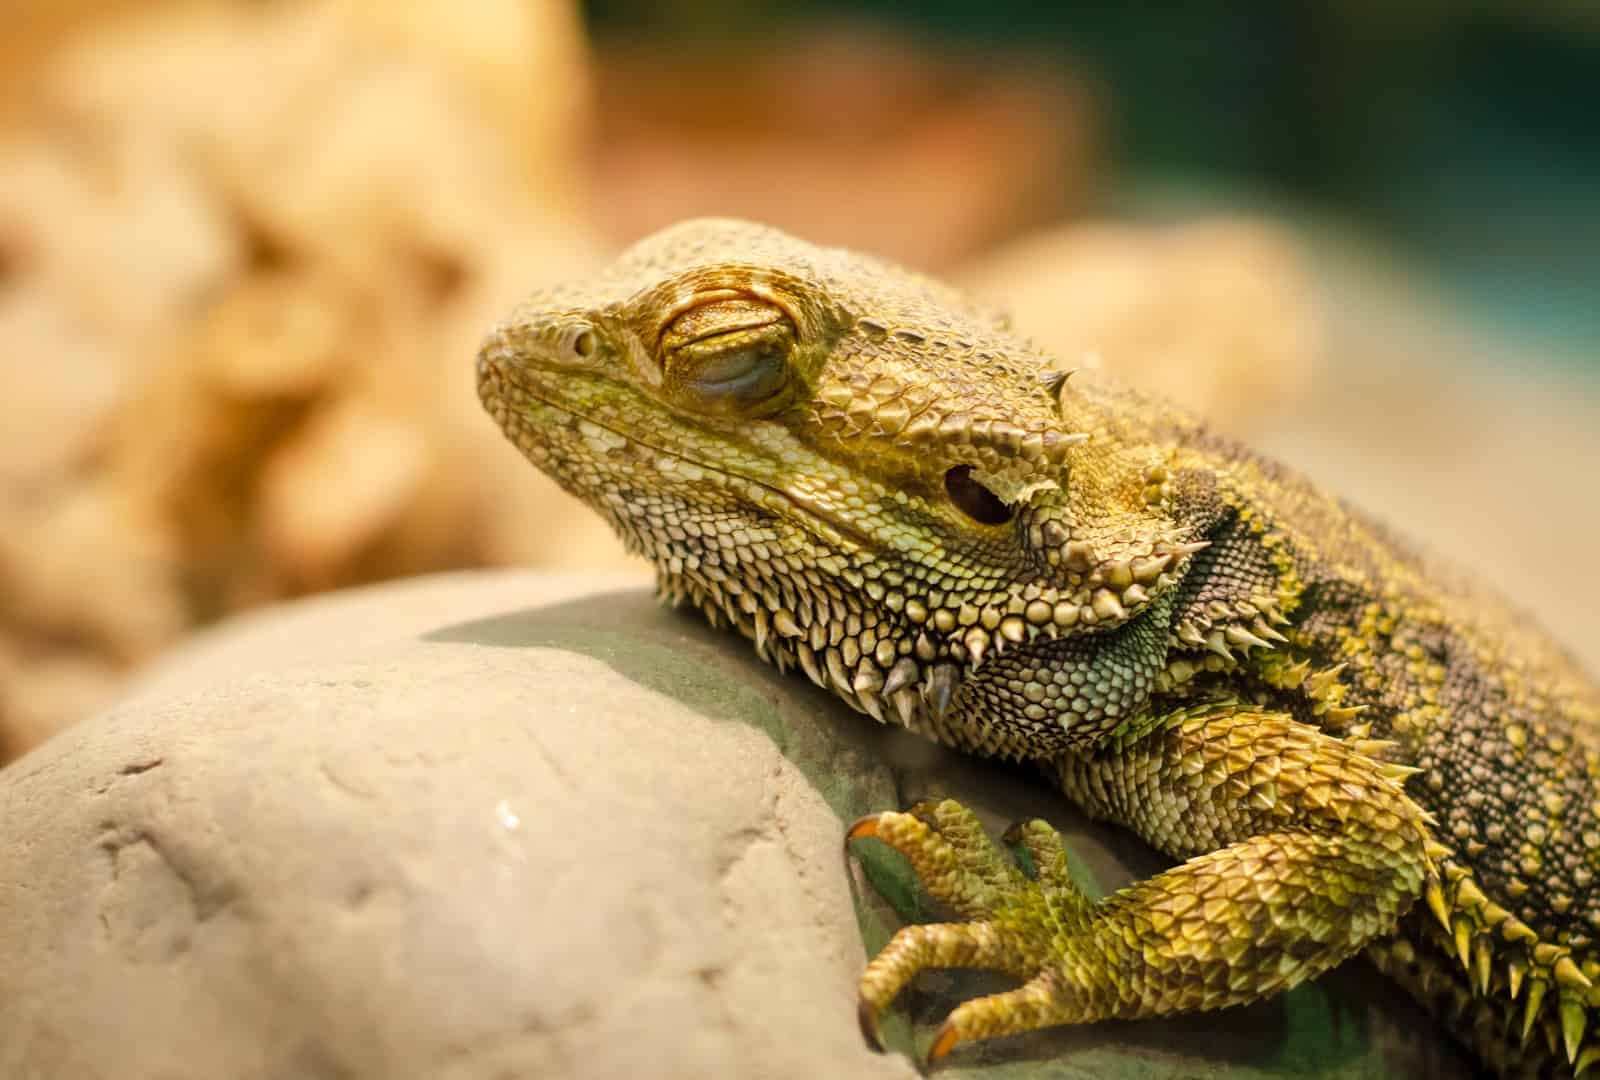 How do bearded dragons sleep? That's what we're answering today! Get to know why bearded dragons have several sleep quirks and their effects.